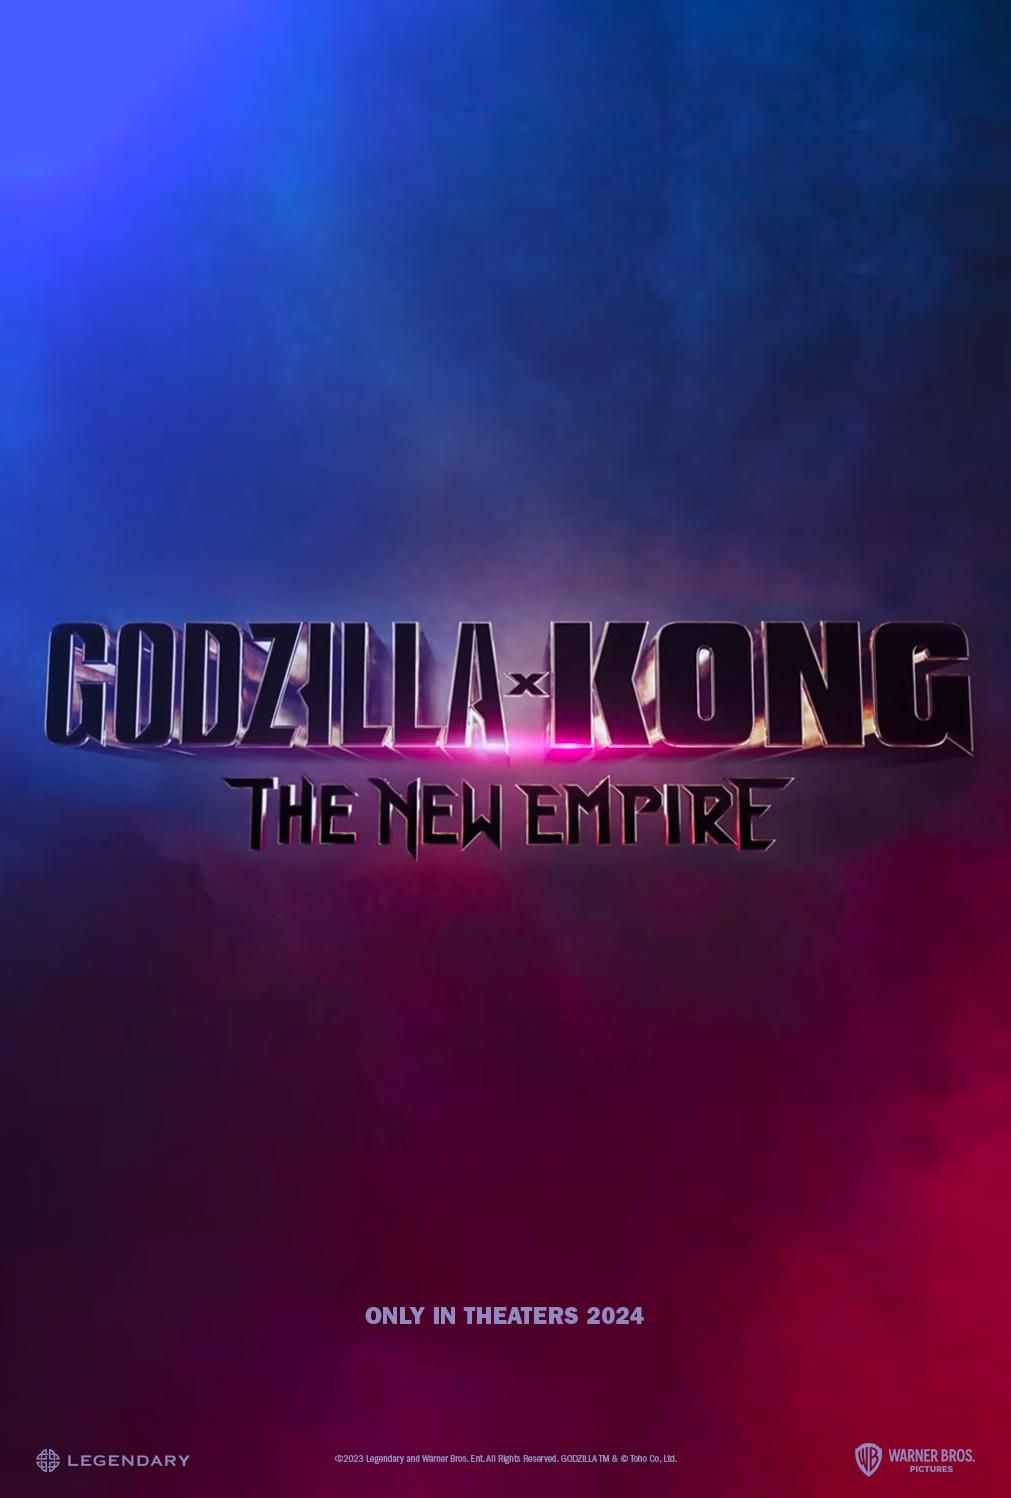 Godzilla vs Kong 2 is happening – and it's filming this year